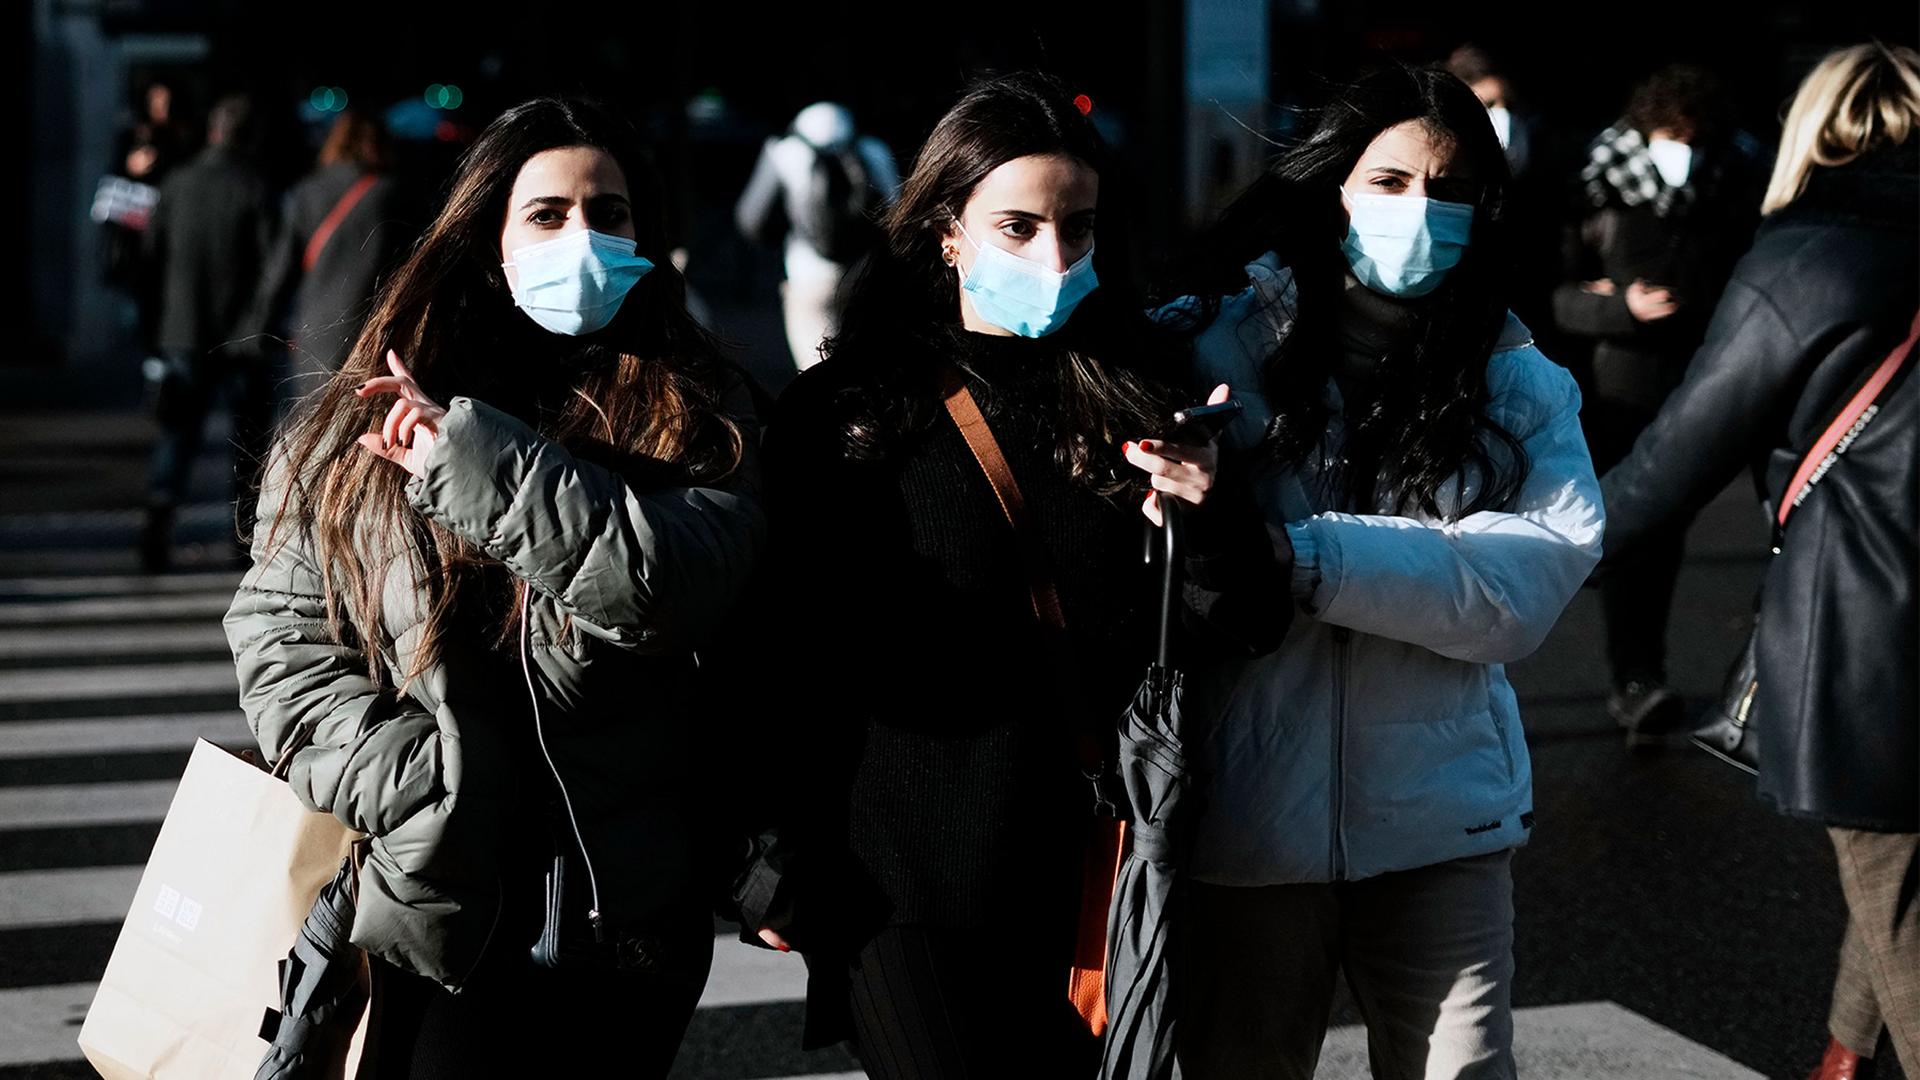 Women wear mask to prevent the spread of the COVID-19, in Paris, France